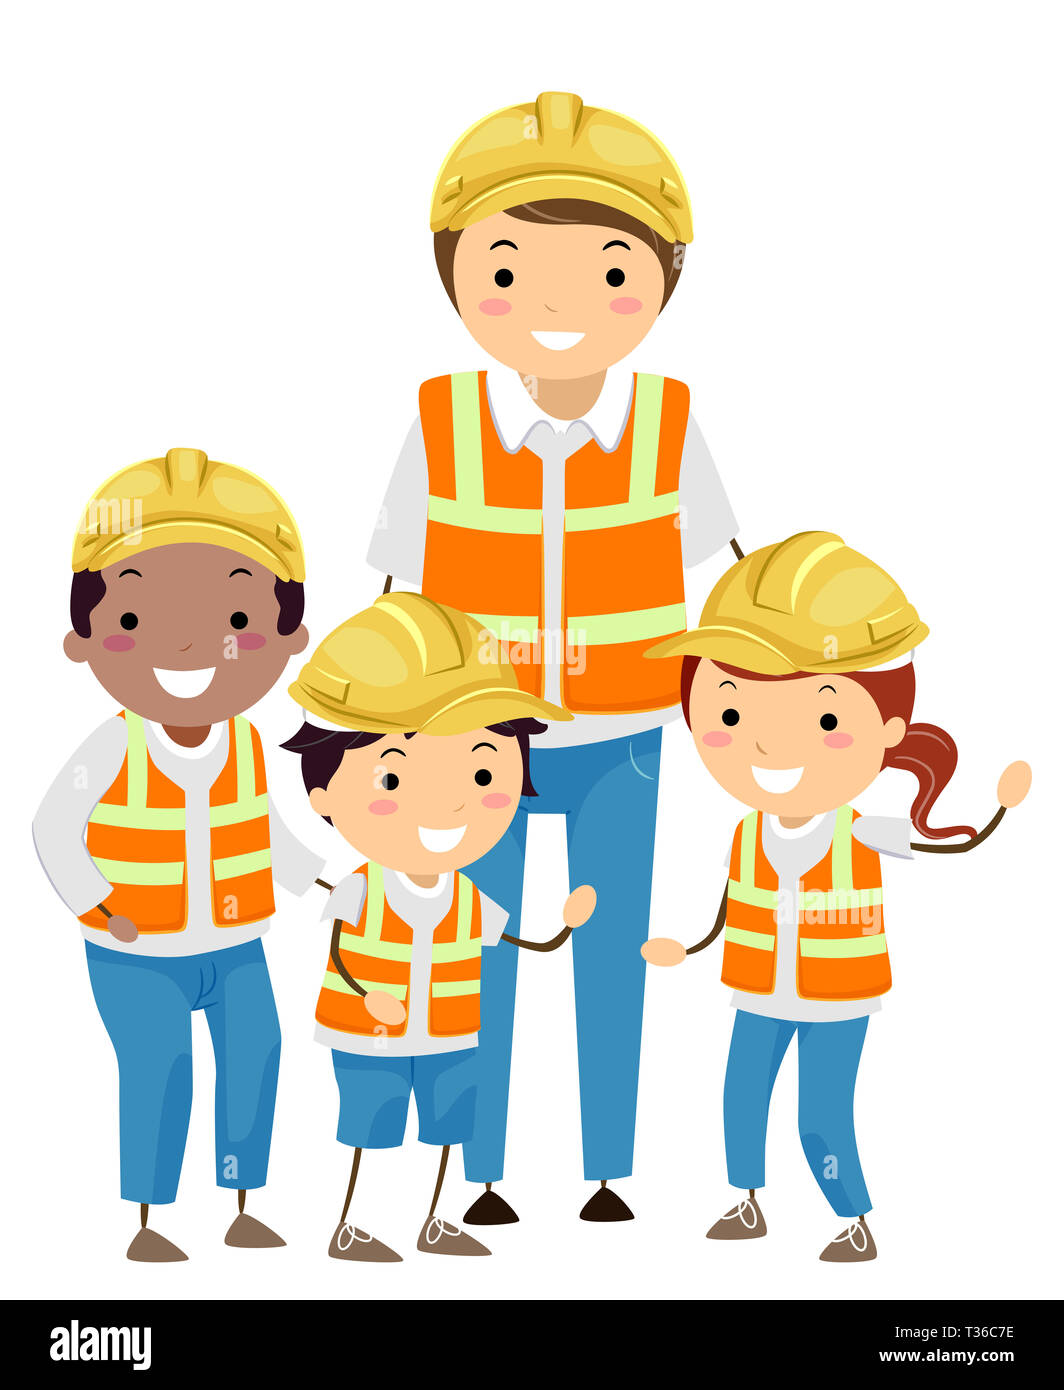 Illustration of Stickman Kids with Construction Engineer Wearing Yellow Hard Hat and Safety Vest Stock Photo